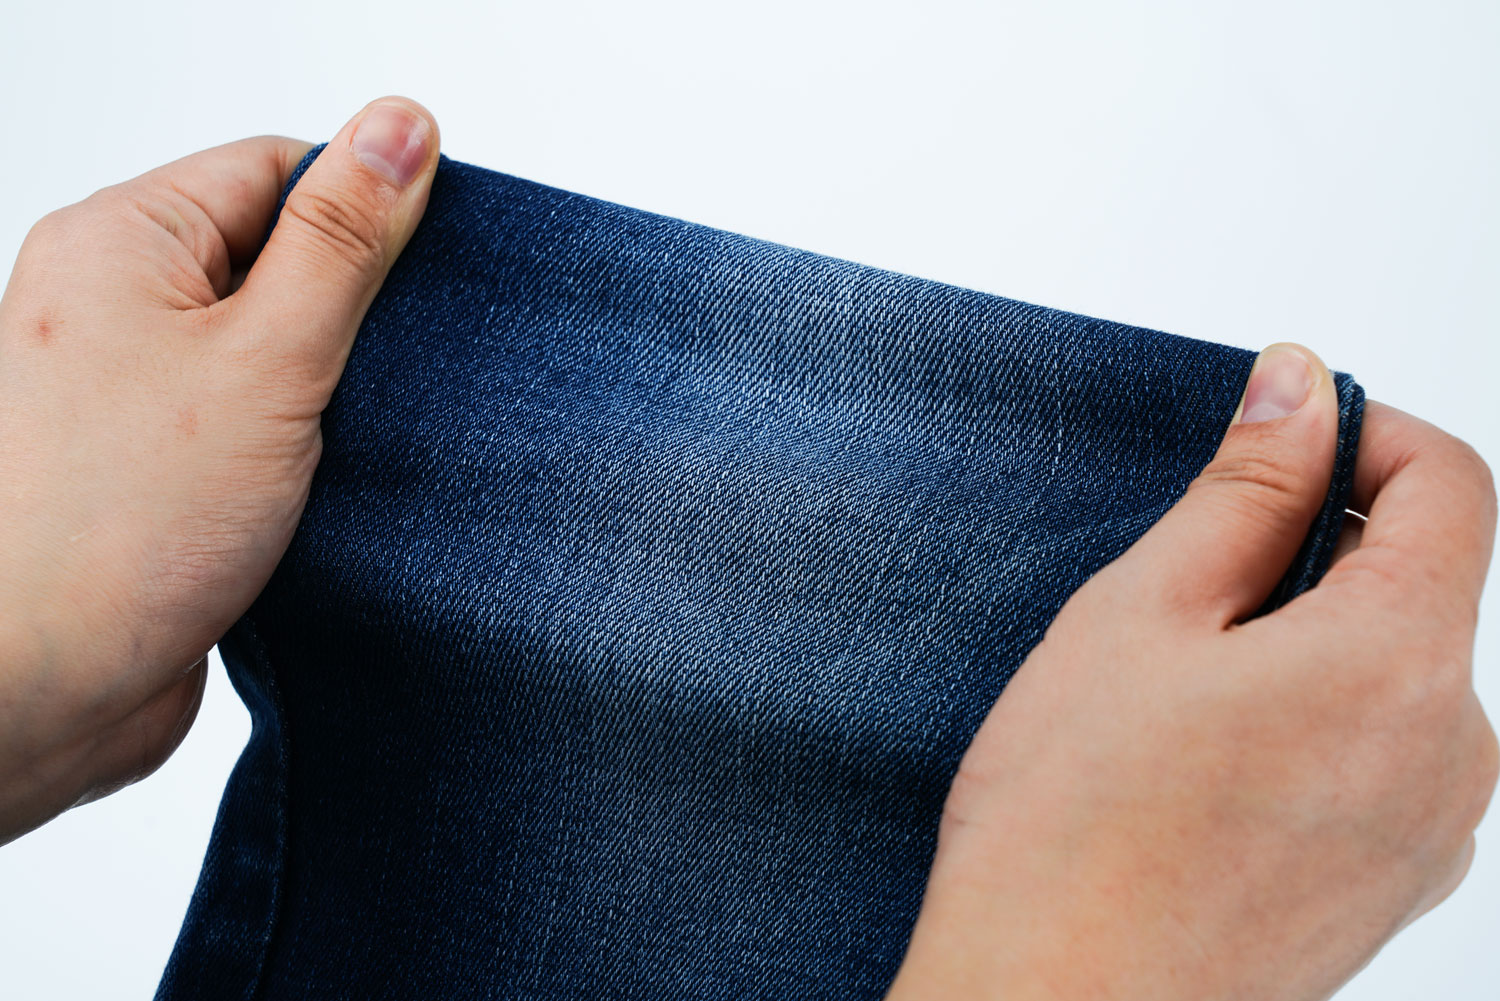 How to Choose Professional Stretchable Denim Fabric? 1